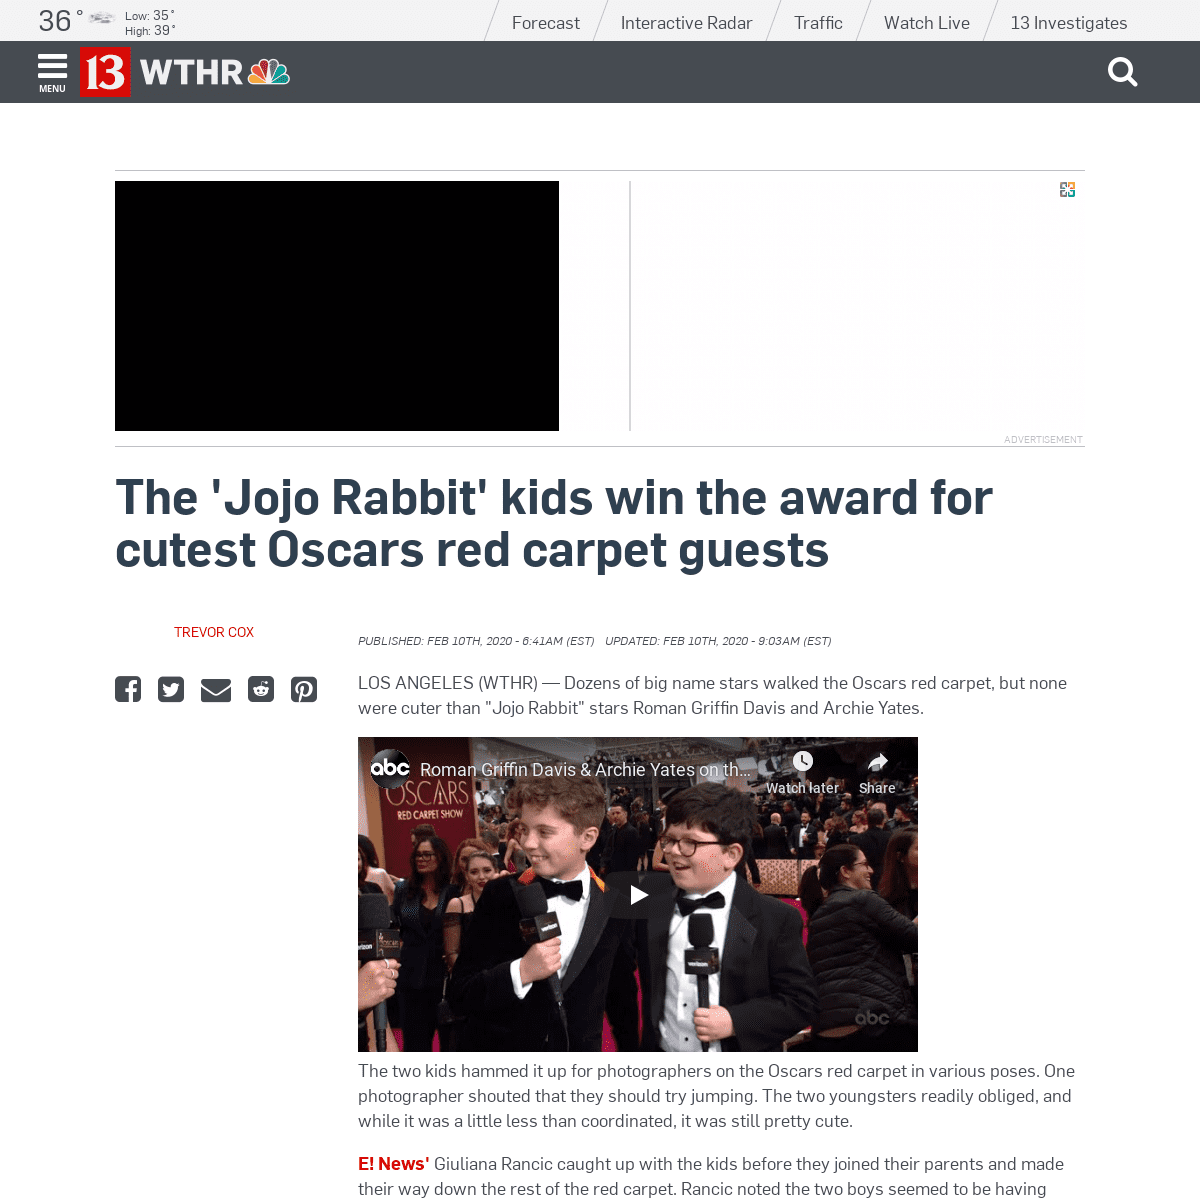 A complete backup of www.wthr.com/article/jojo-rabbit-kids-win-award-cutest-oscars-red-carpet-guests